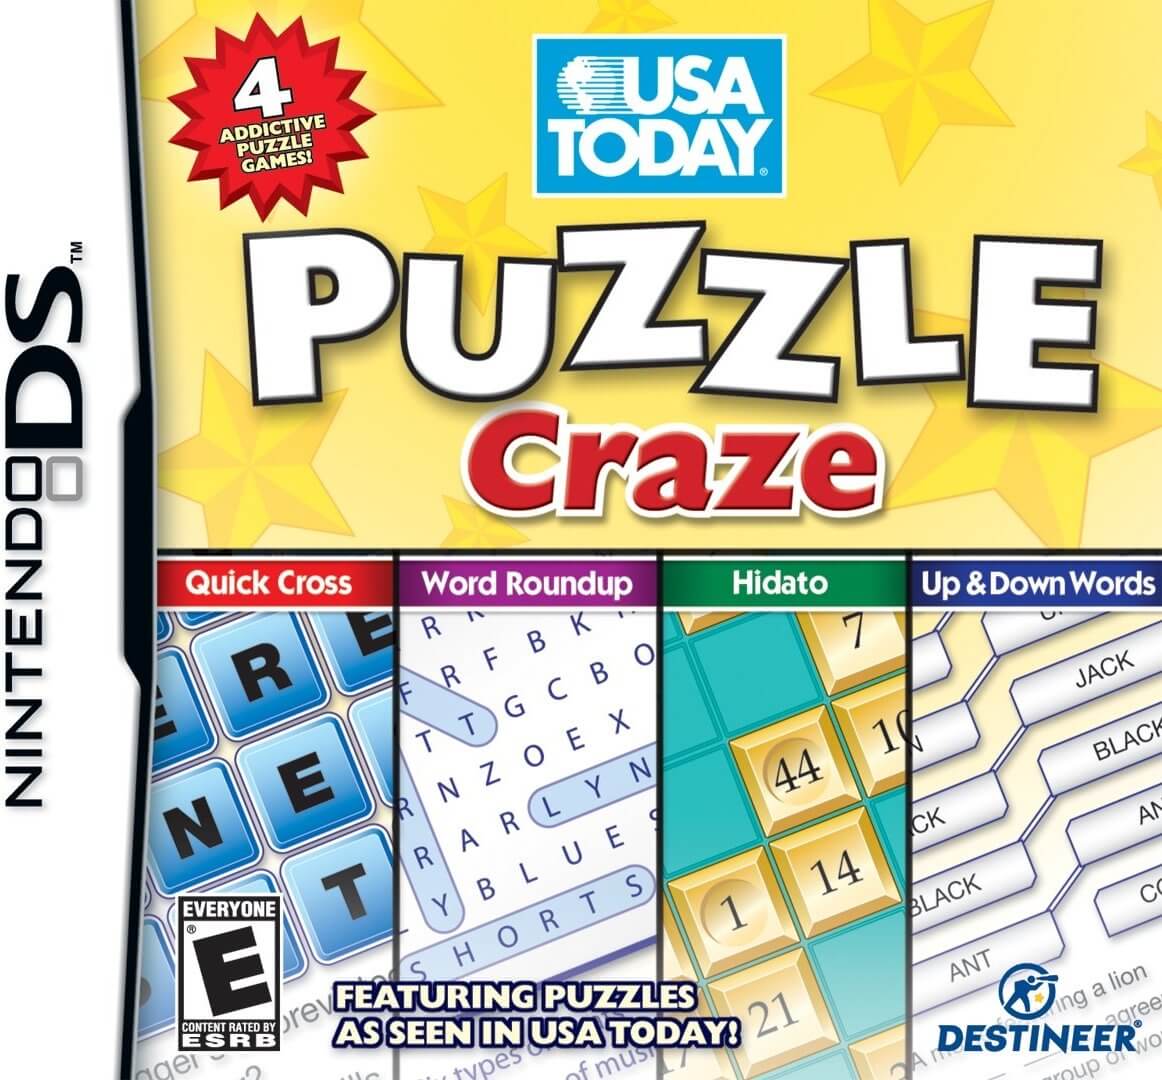 usa-today-puzzle-craze-nintendods-nds-rom-download